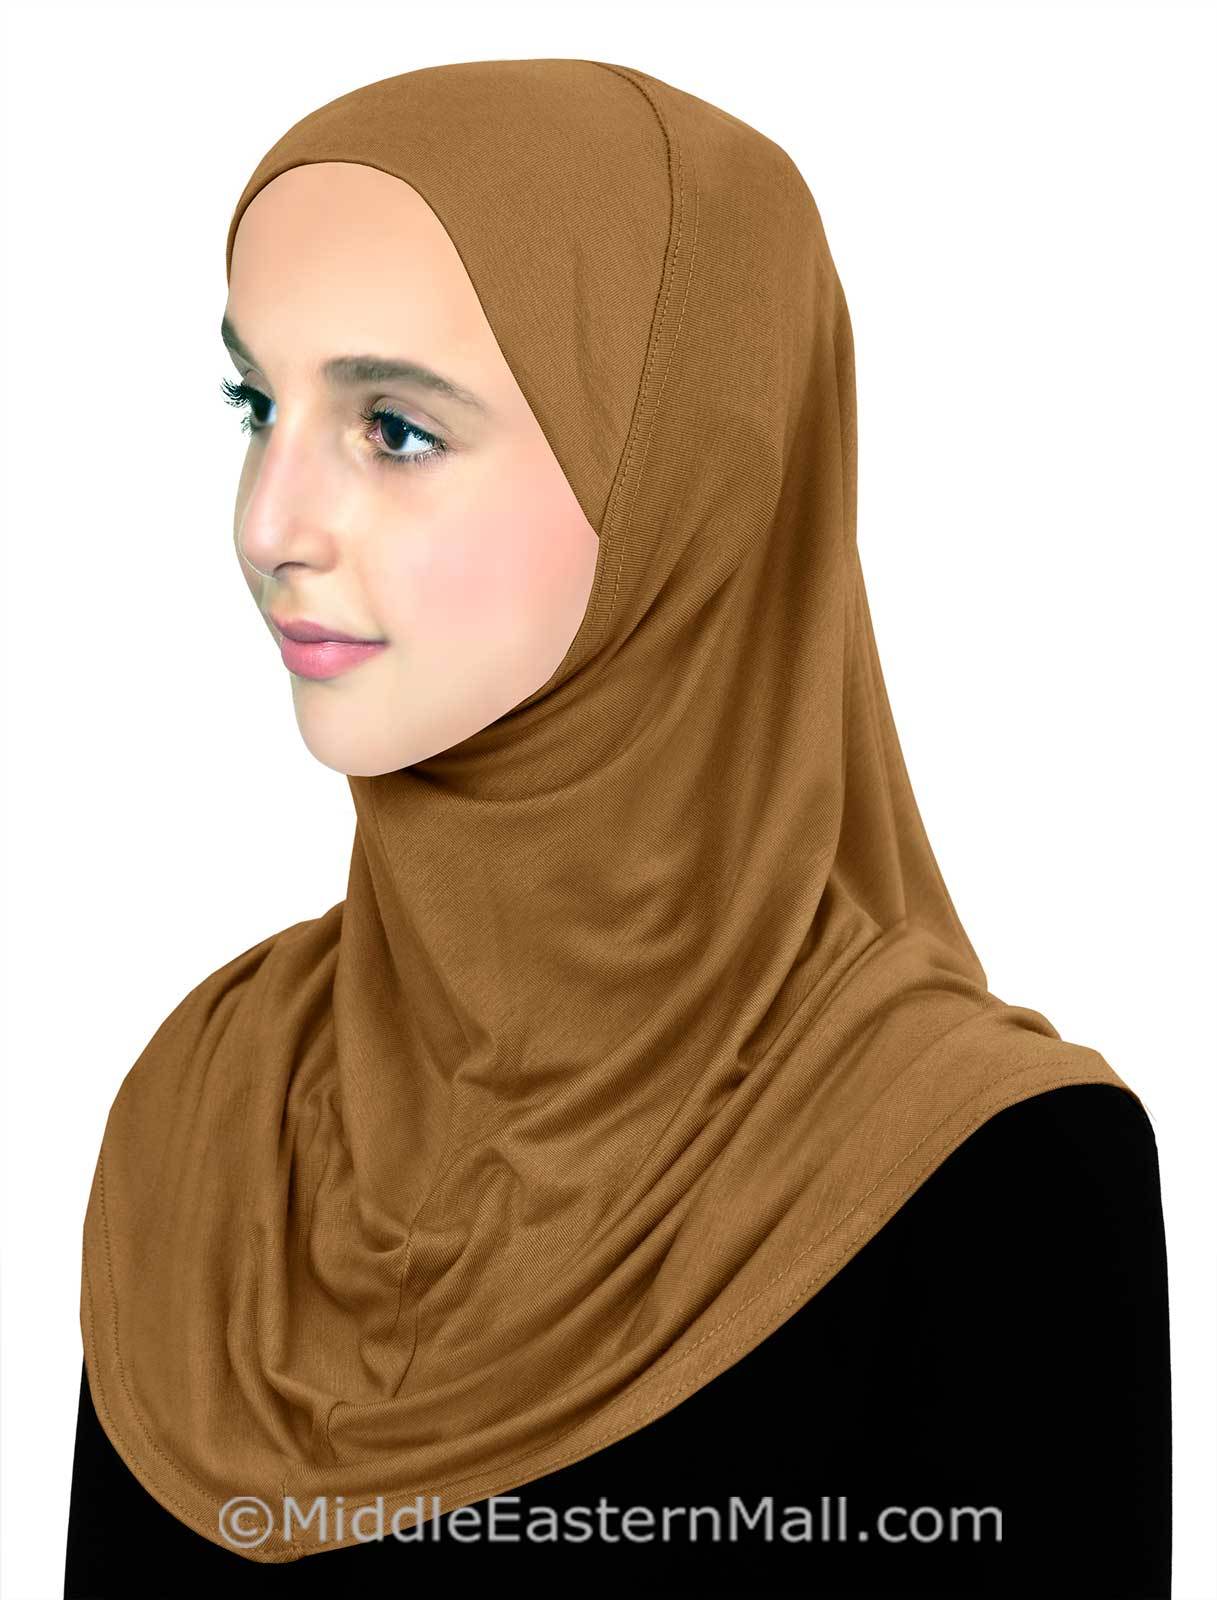 Wholesale Pre-Teen Girl's Cotton Hijab 1 piece Hijabs in 4 Colors No Navy